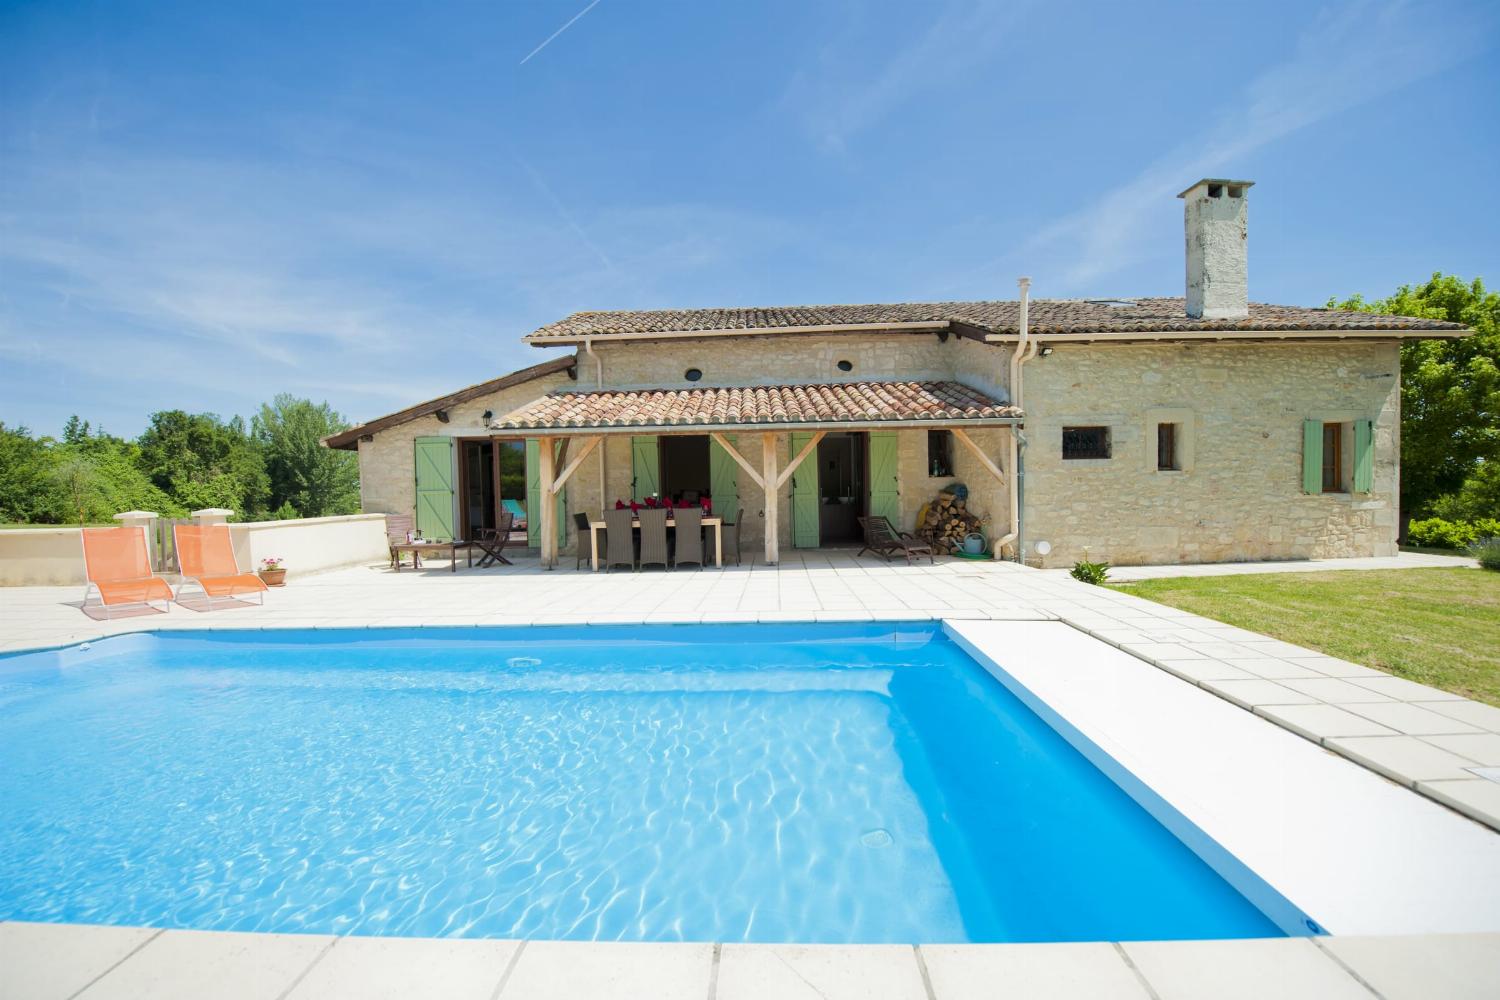 Rental home in Nouvelle-Aquitaine with private heated pool